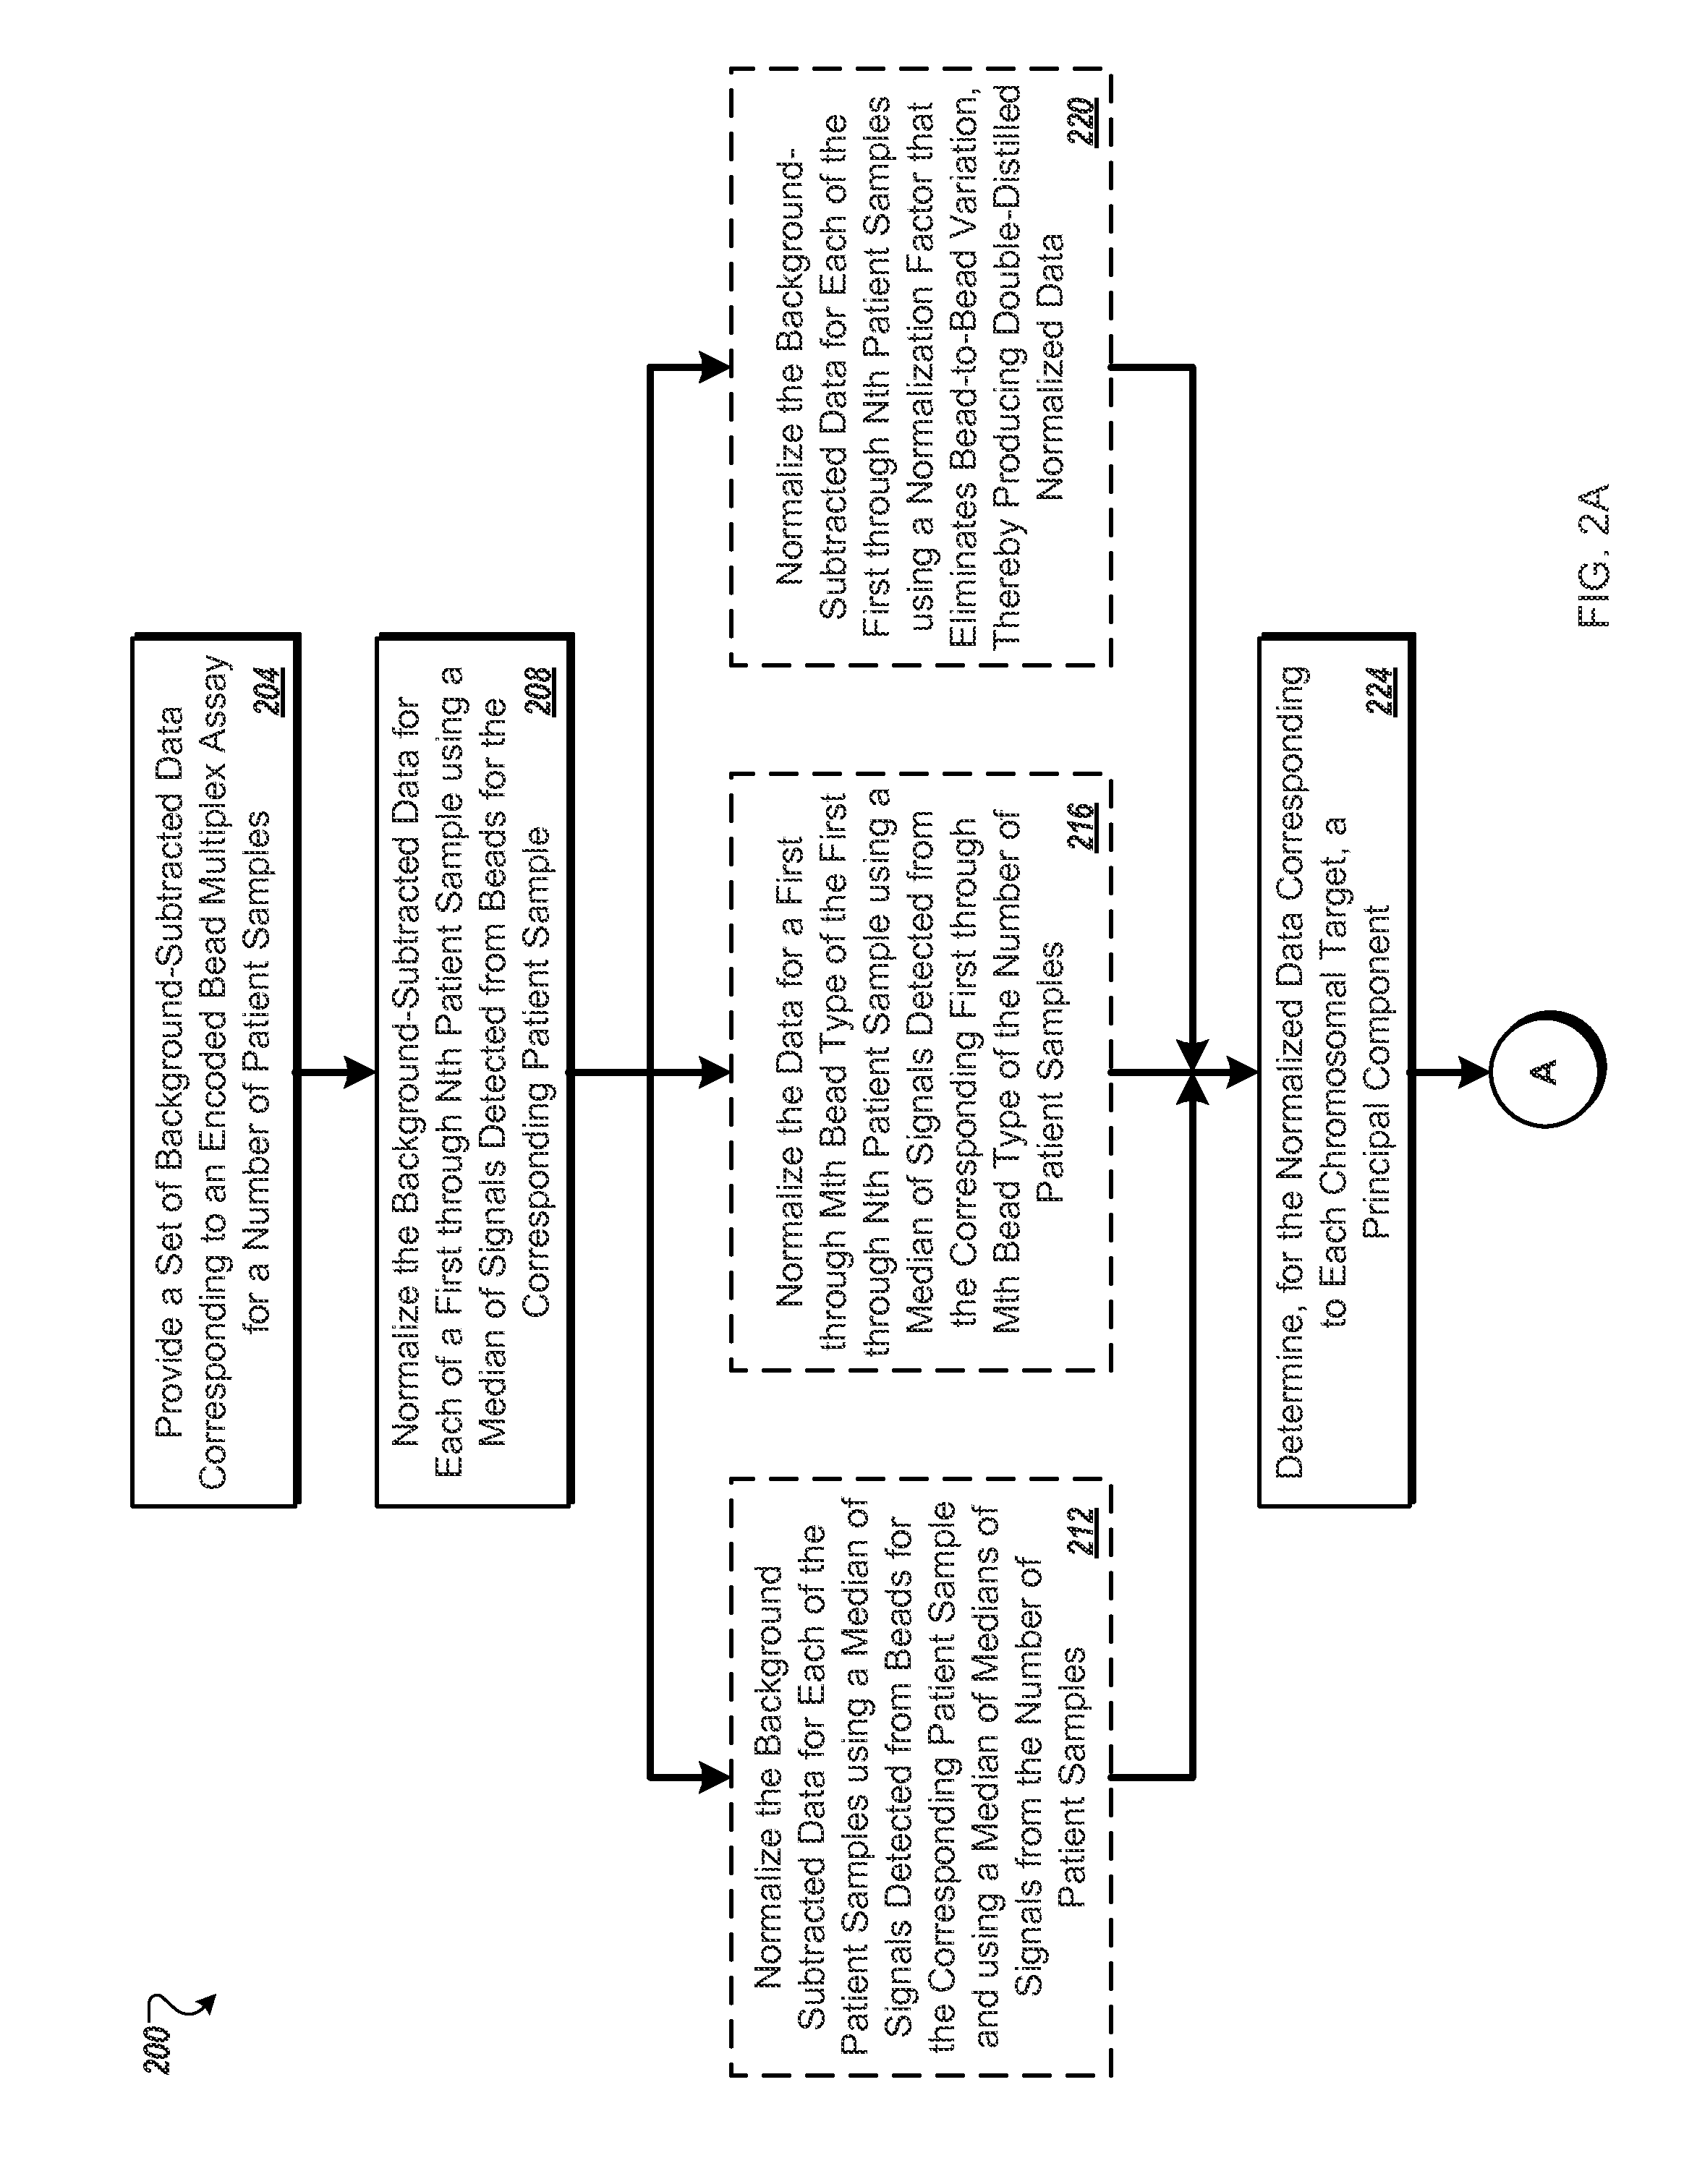 Systems and methods for detection of chromosomal gains and losses